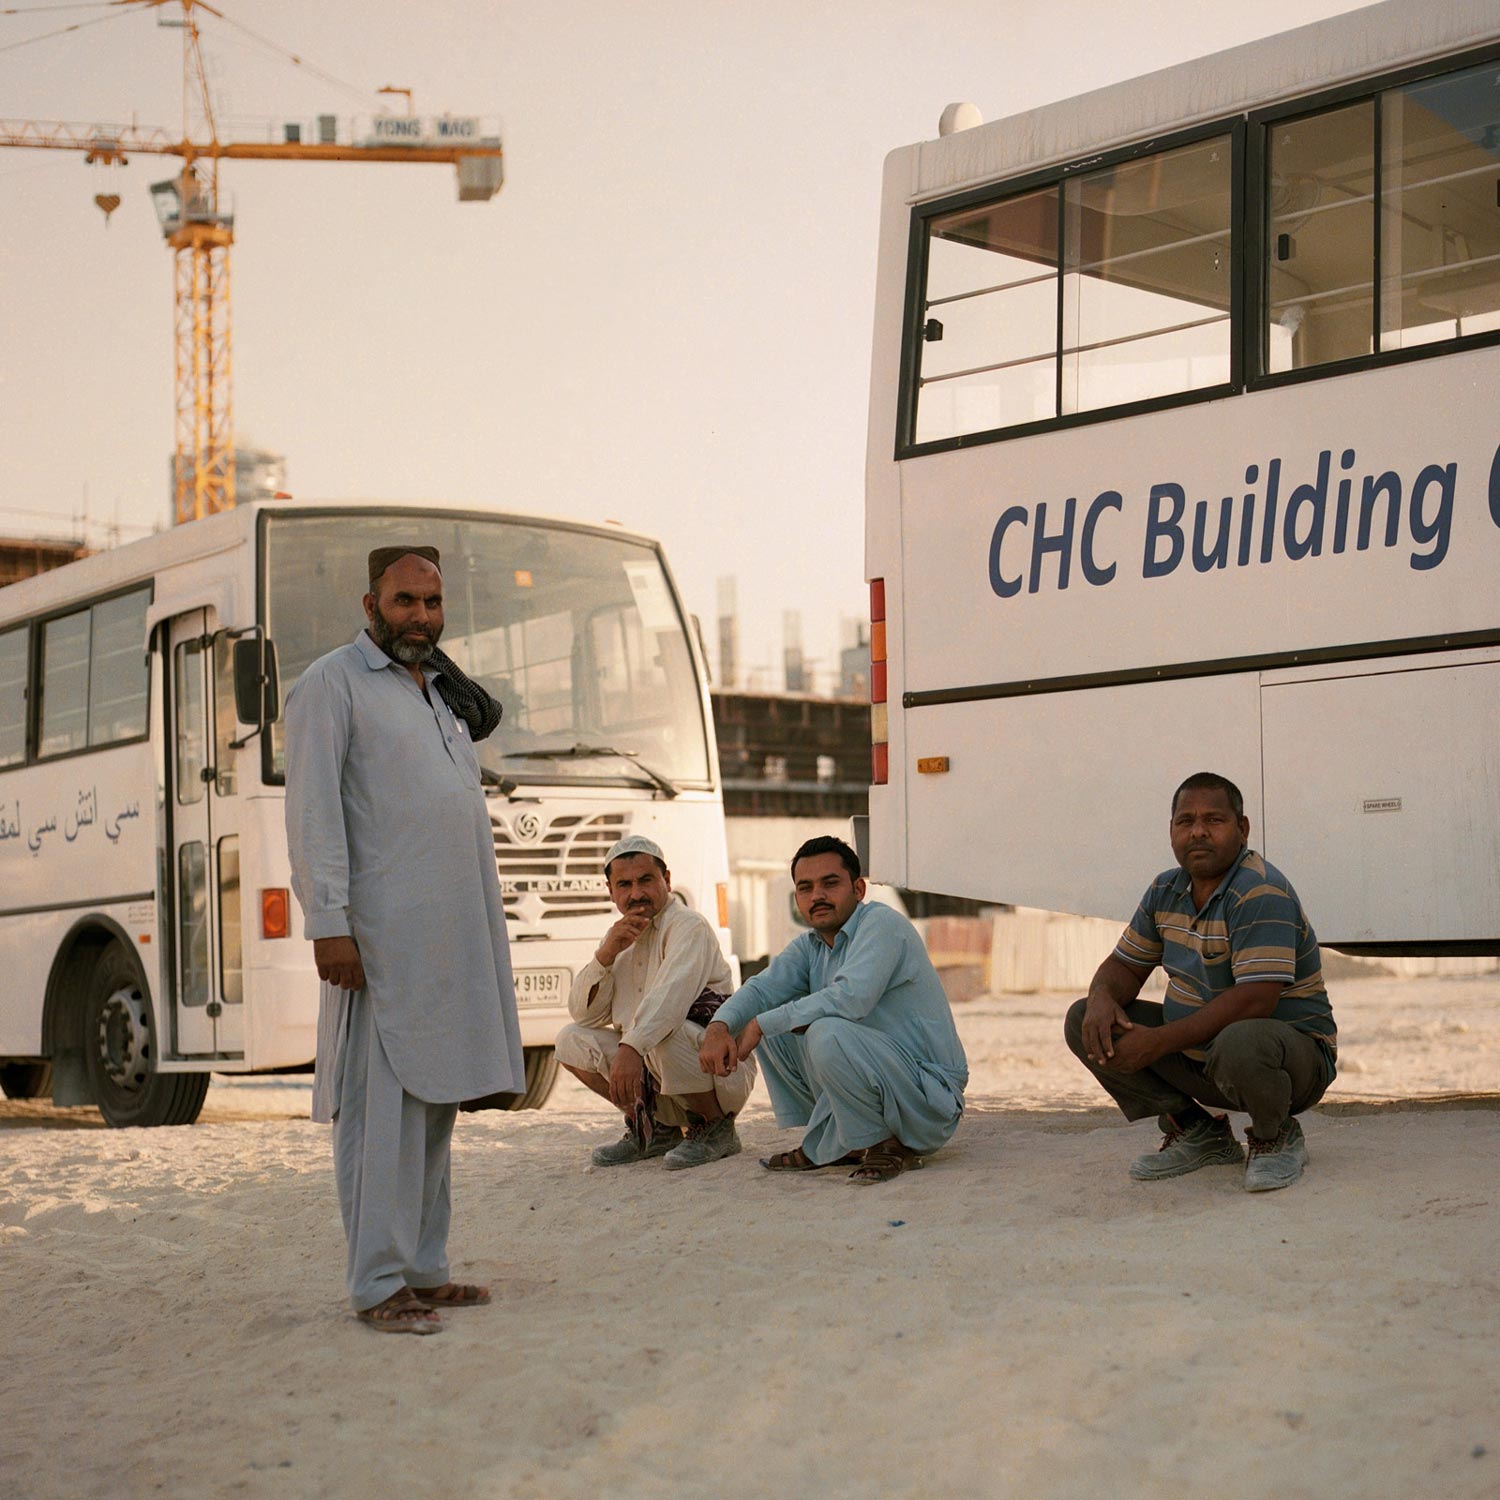 Indian construction workers sitting in the sand, waiting for a bus.